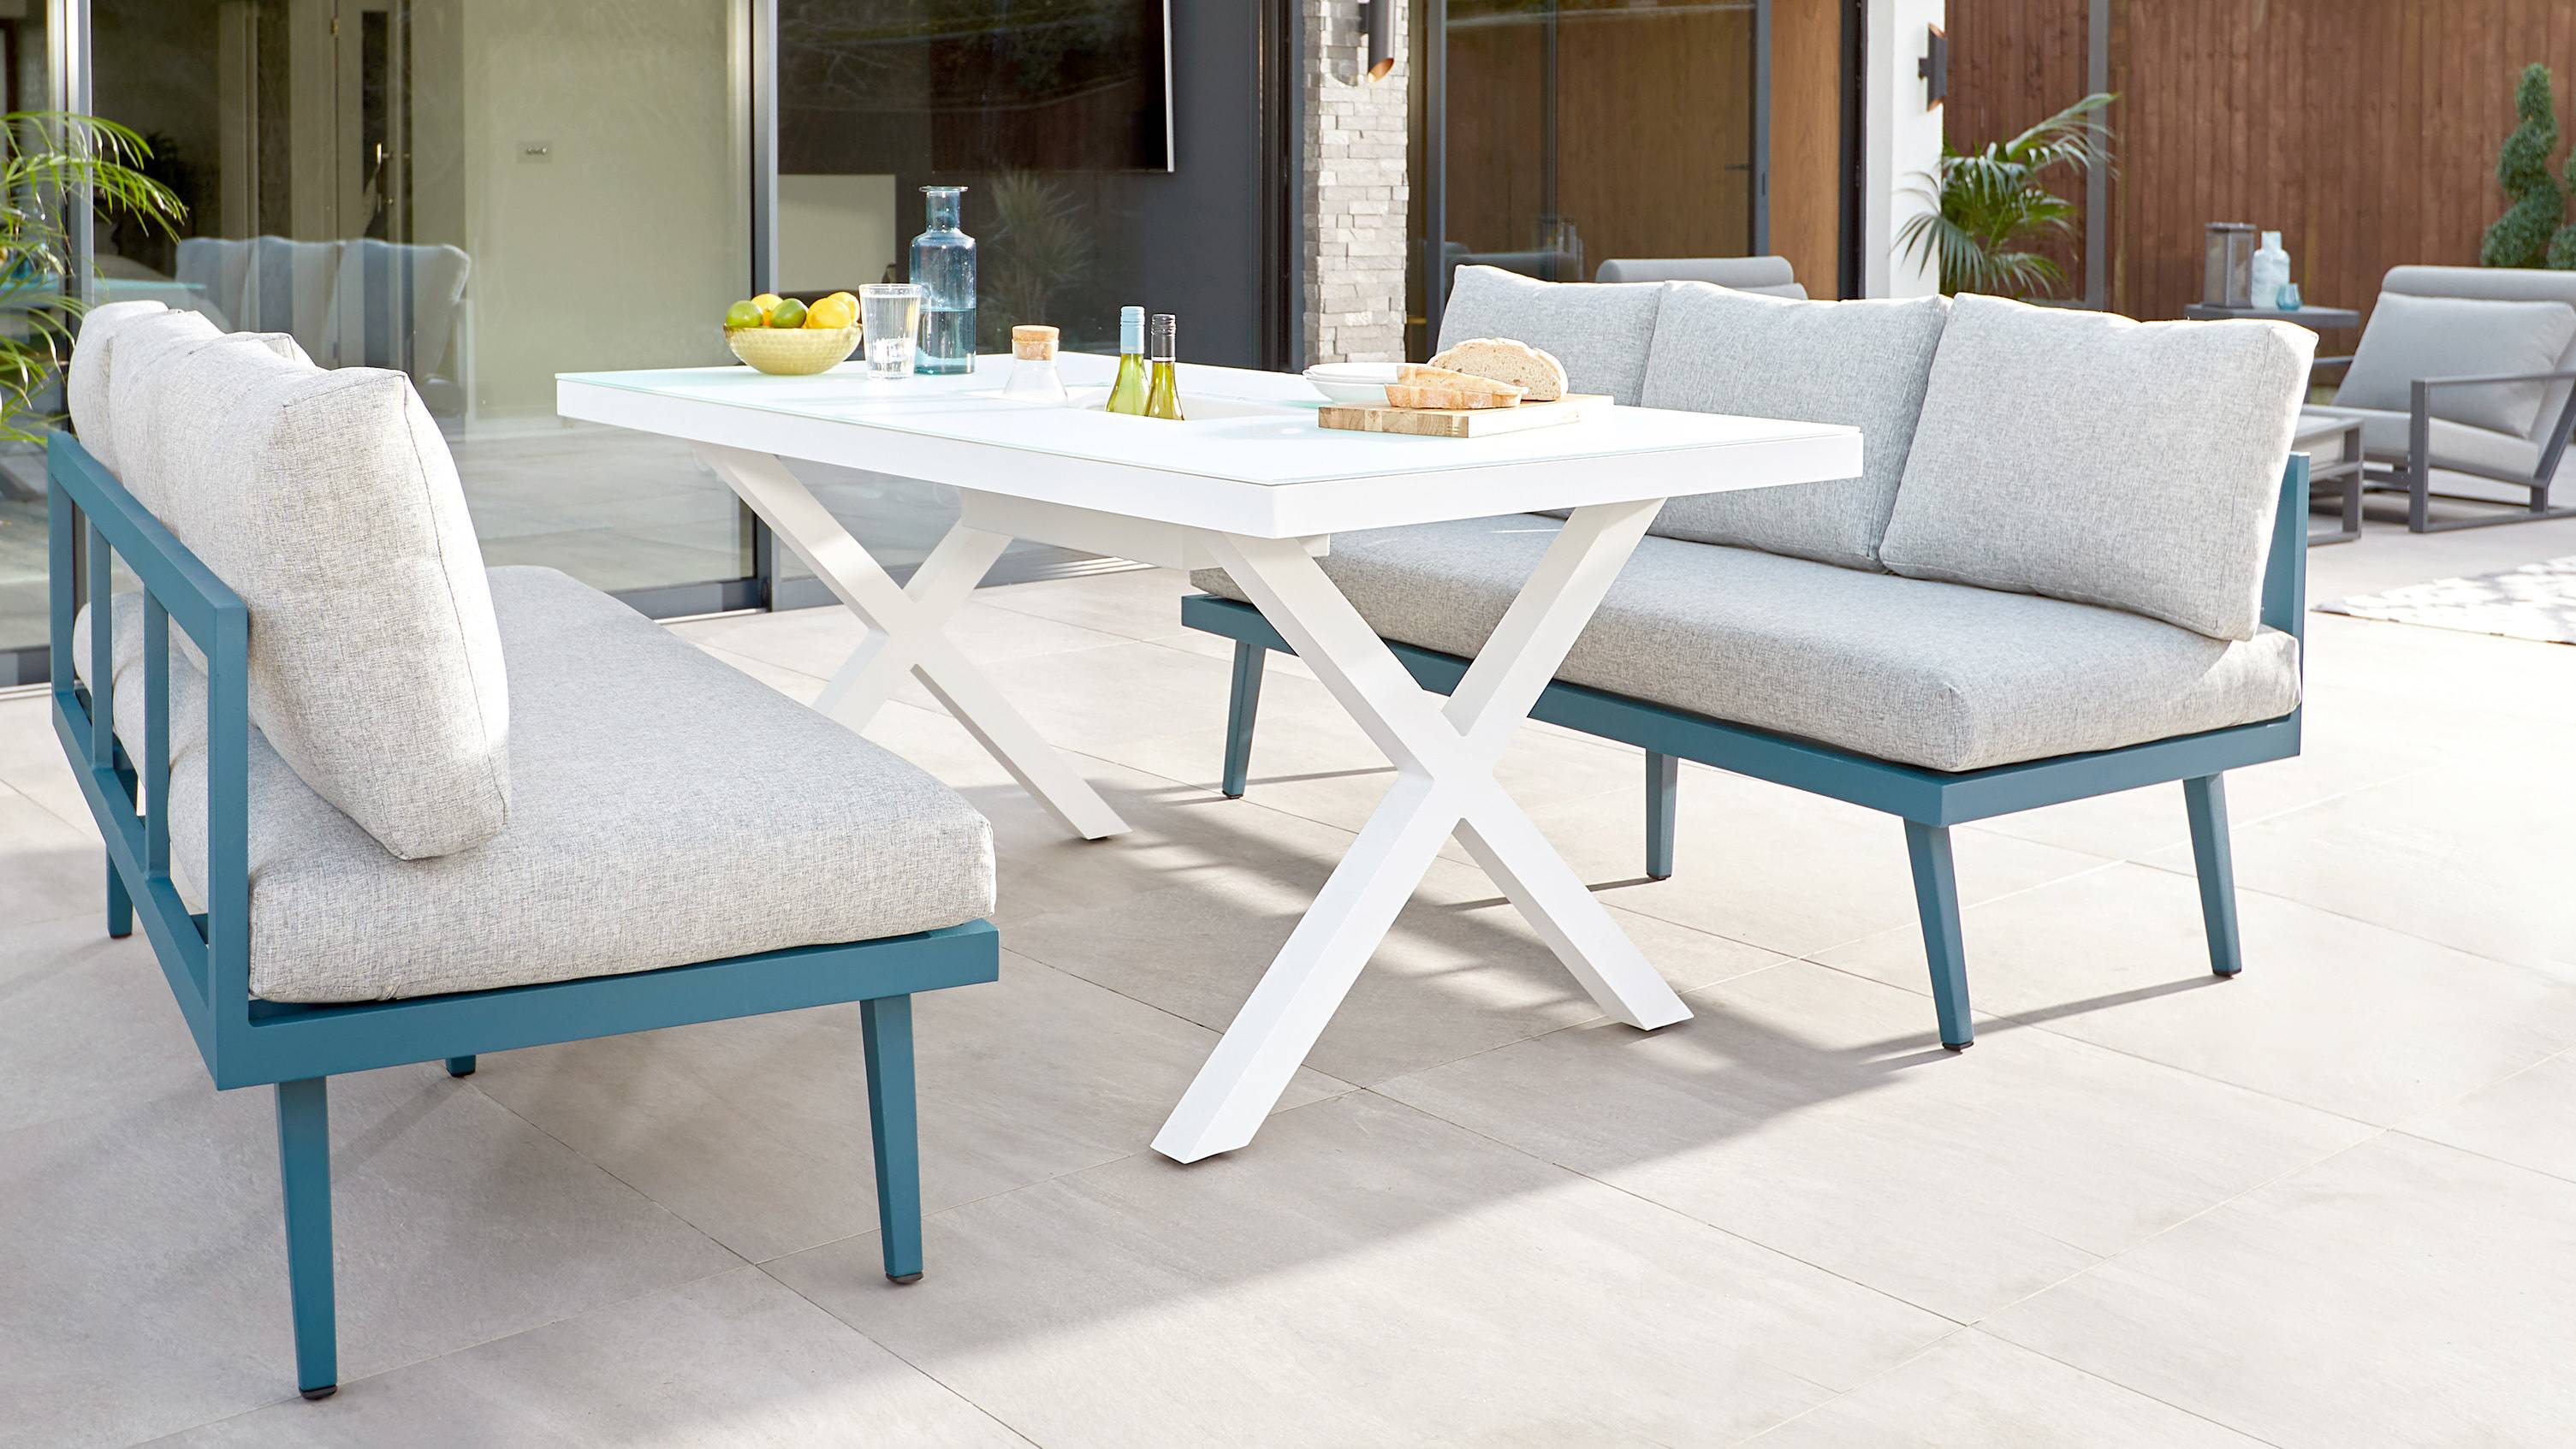 Contemporary outdoor dining bench set